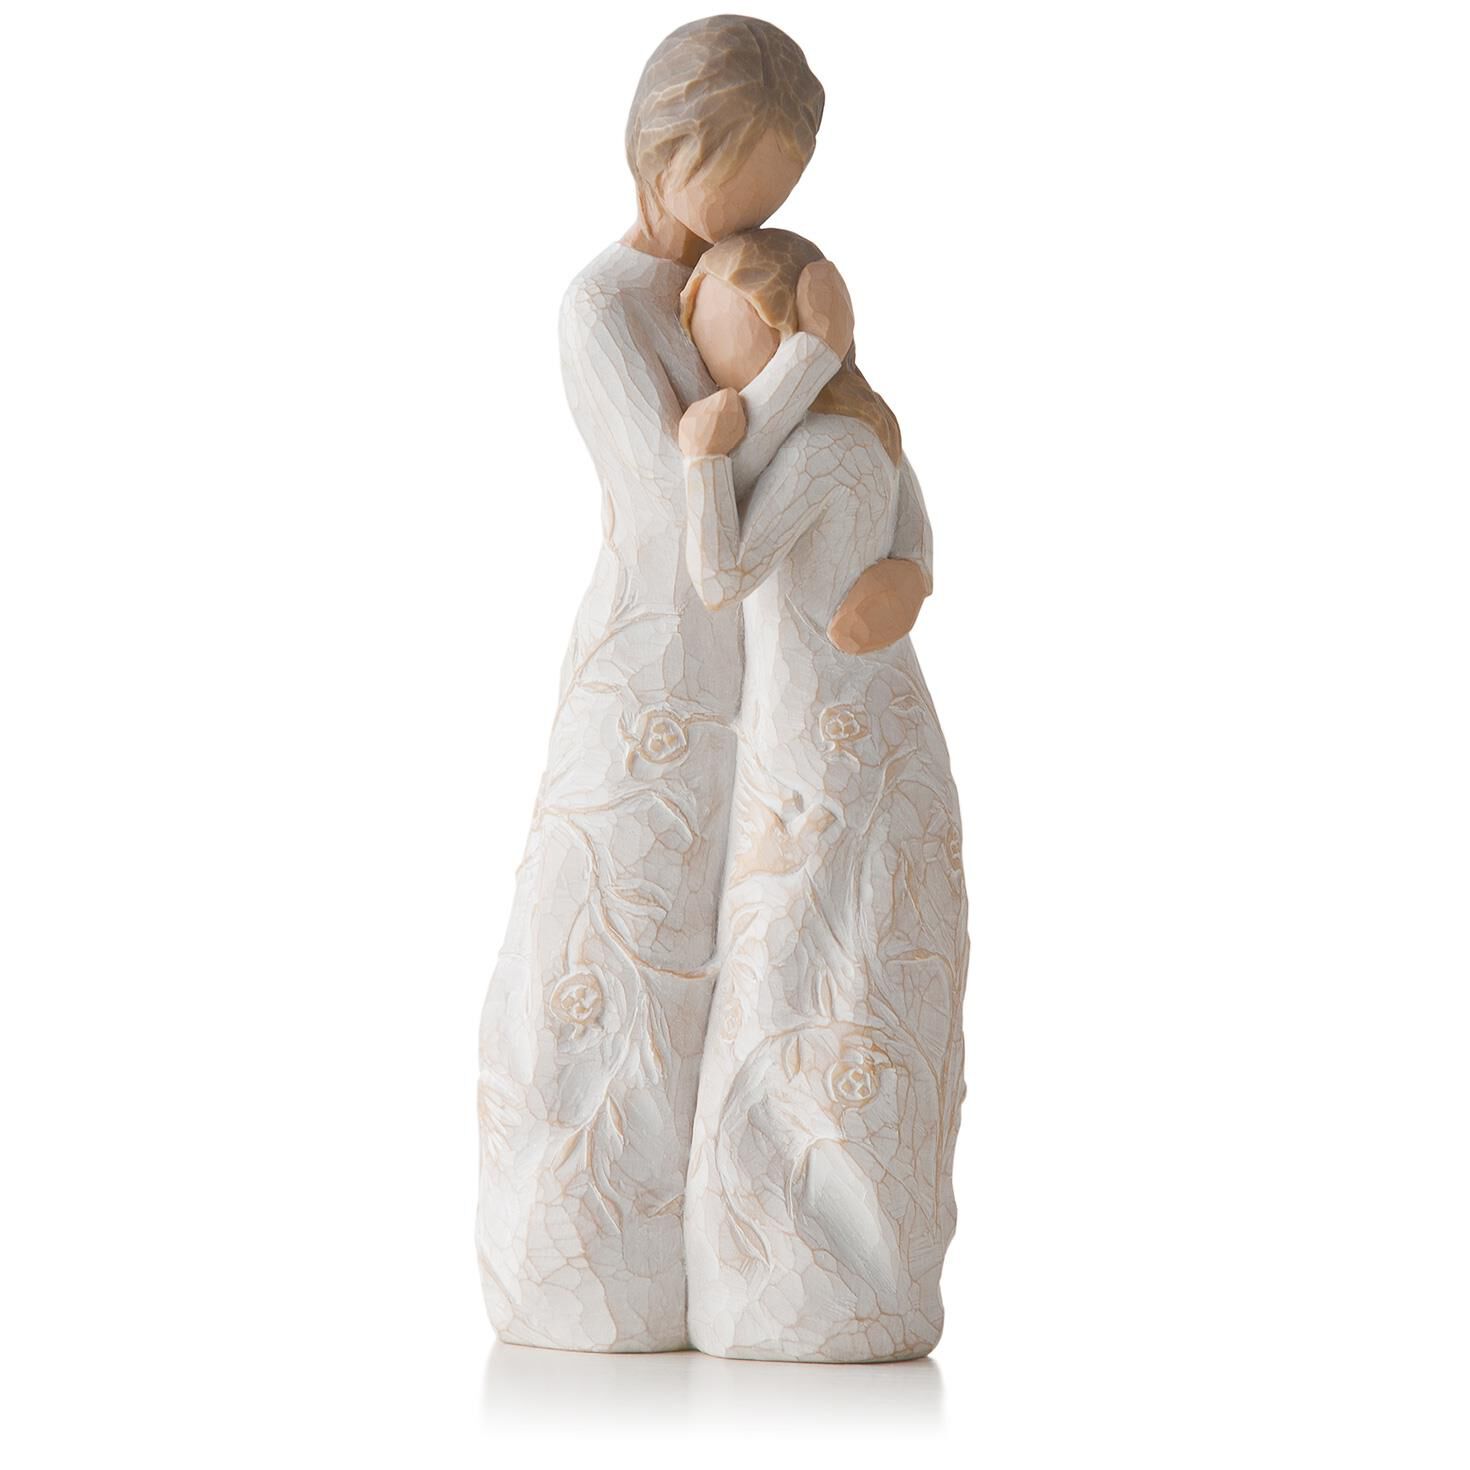 https://www.hallmark.com/dw/image/v2/AALB_PRD/on/demandware.static/-/Sites-hallmark-master/default/dwecdacd3a/images/finished-goods/willow-tree-close-to-me-mother-daughter-figurine-root-26222_1470_1.jpg?sfrm=jpg